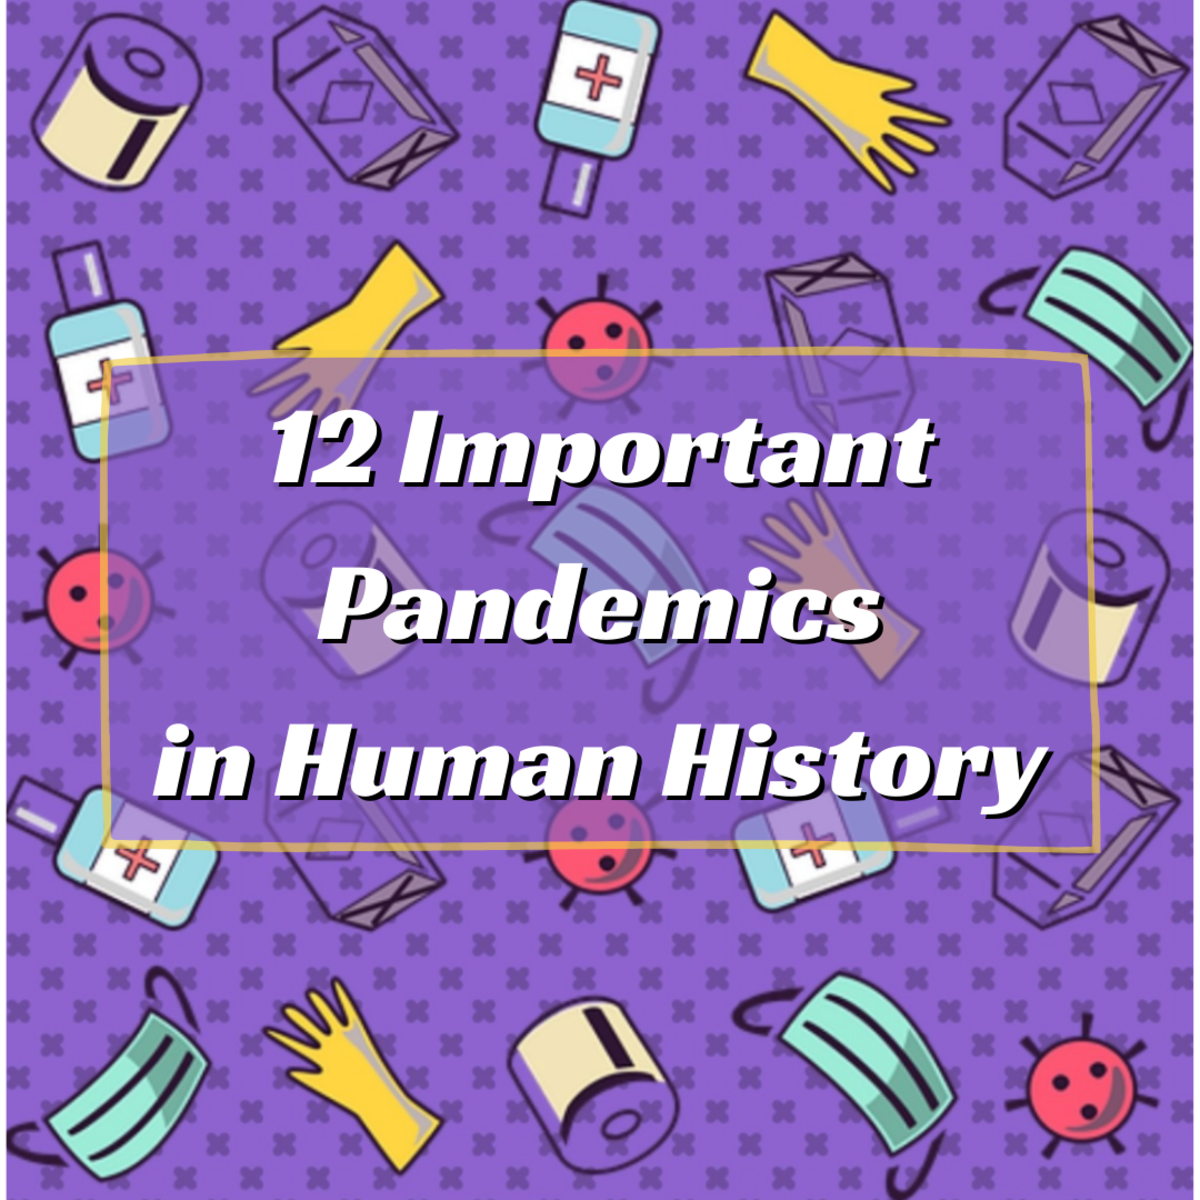 This article covers 12 significant disease pandemics in human history, from the Antonine Plague to tuberculosis to the 2019 coronavirus. Read on to find overviews of these important moments in the history of human health.